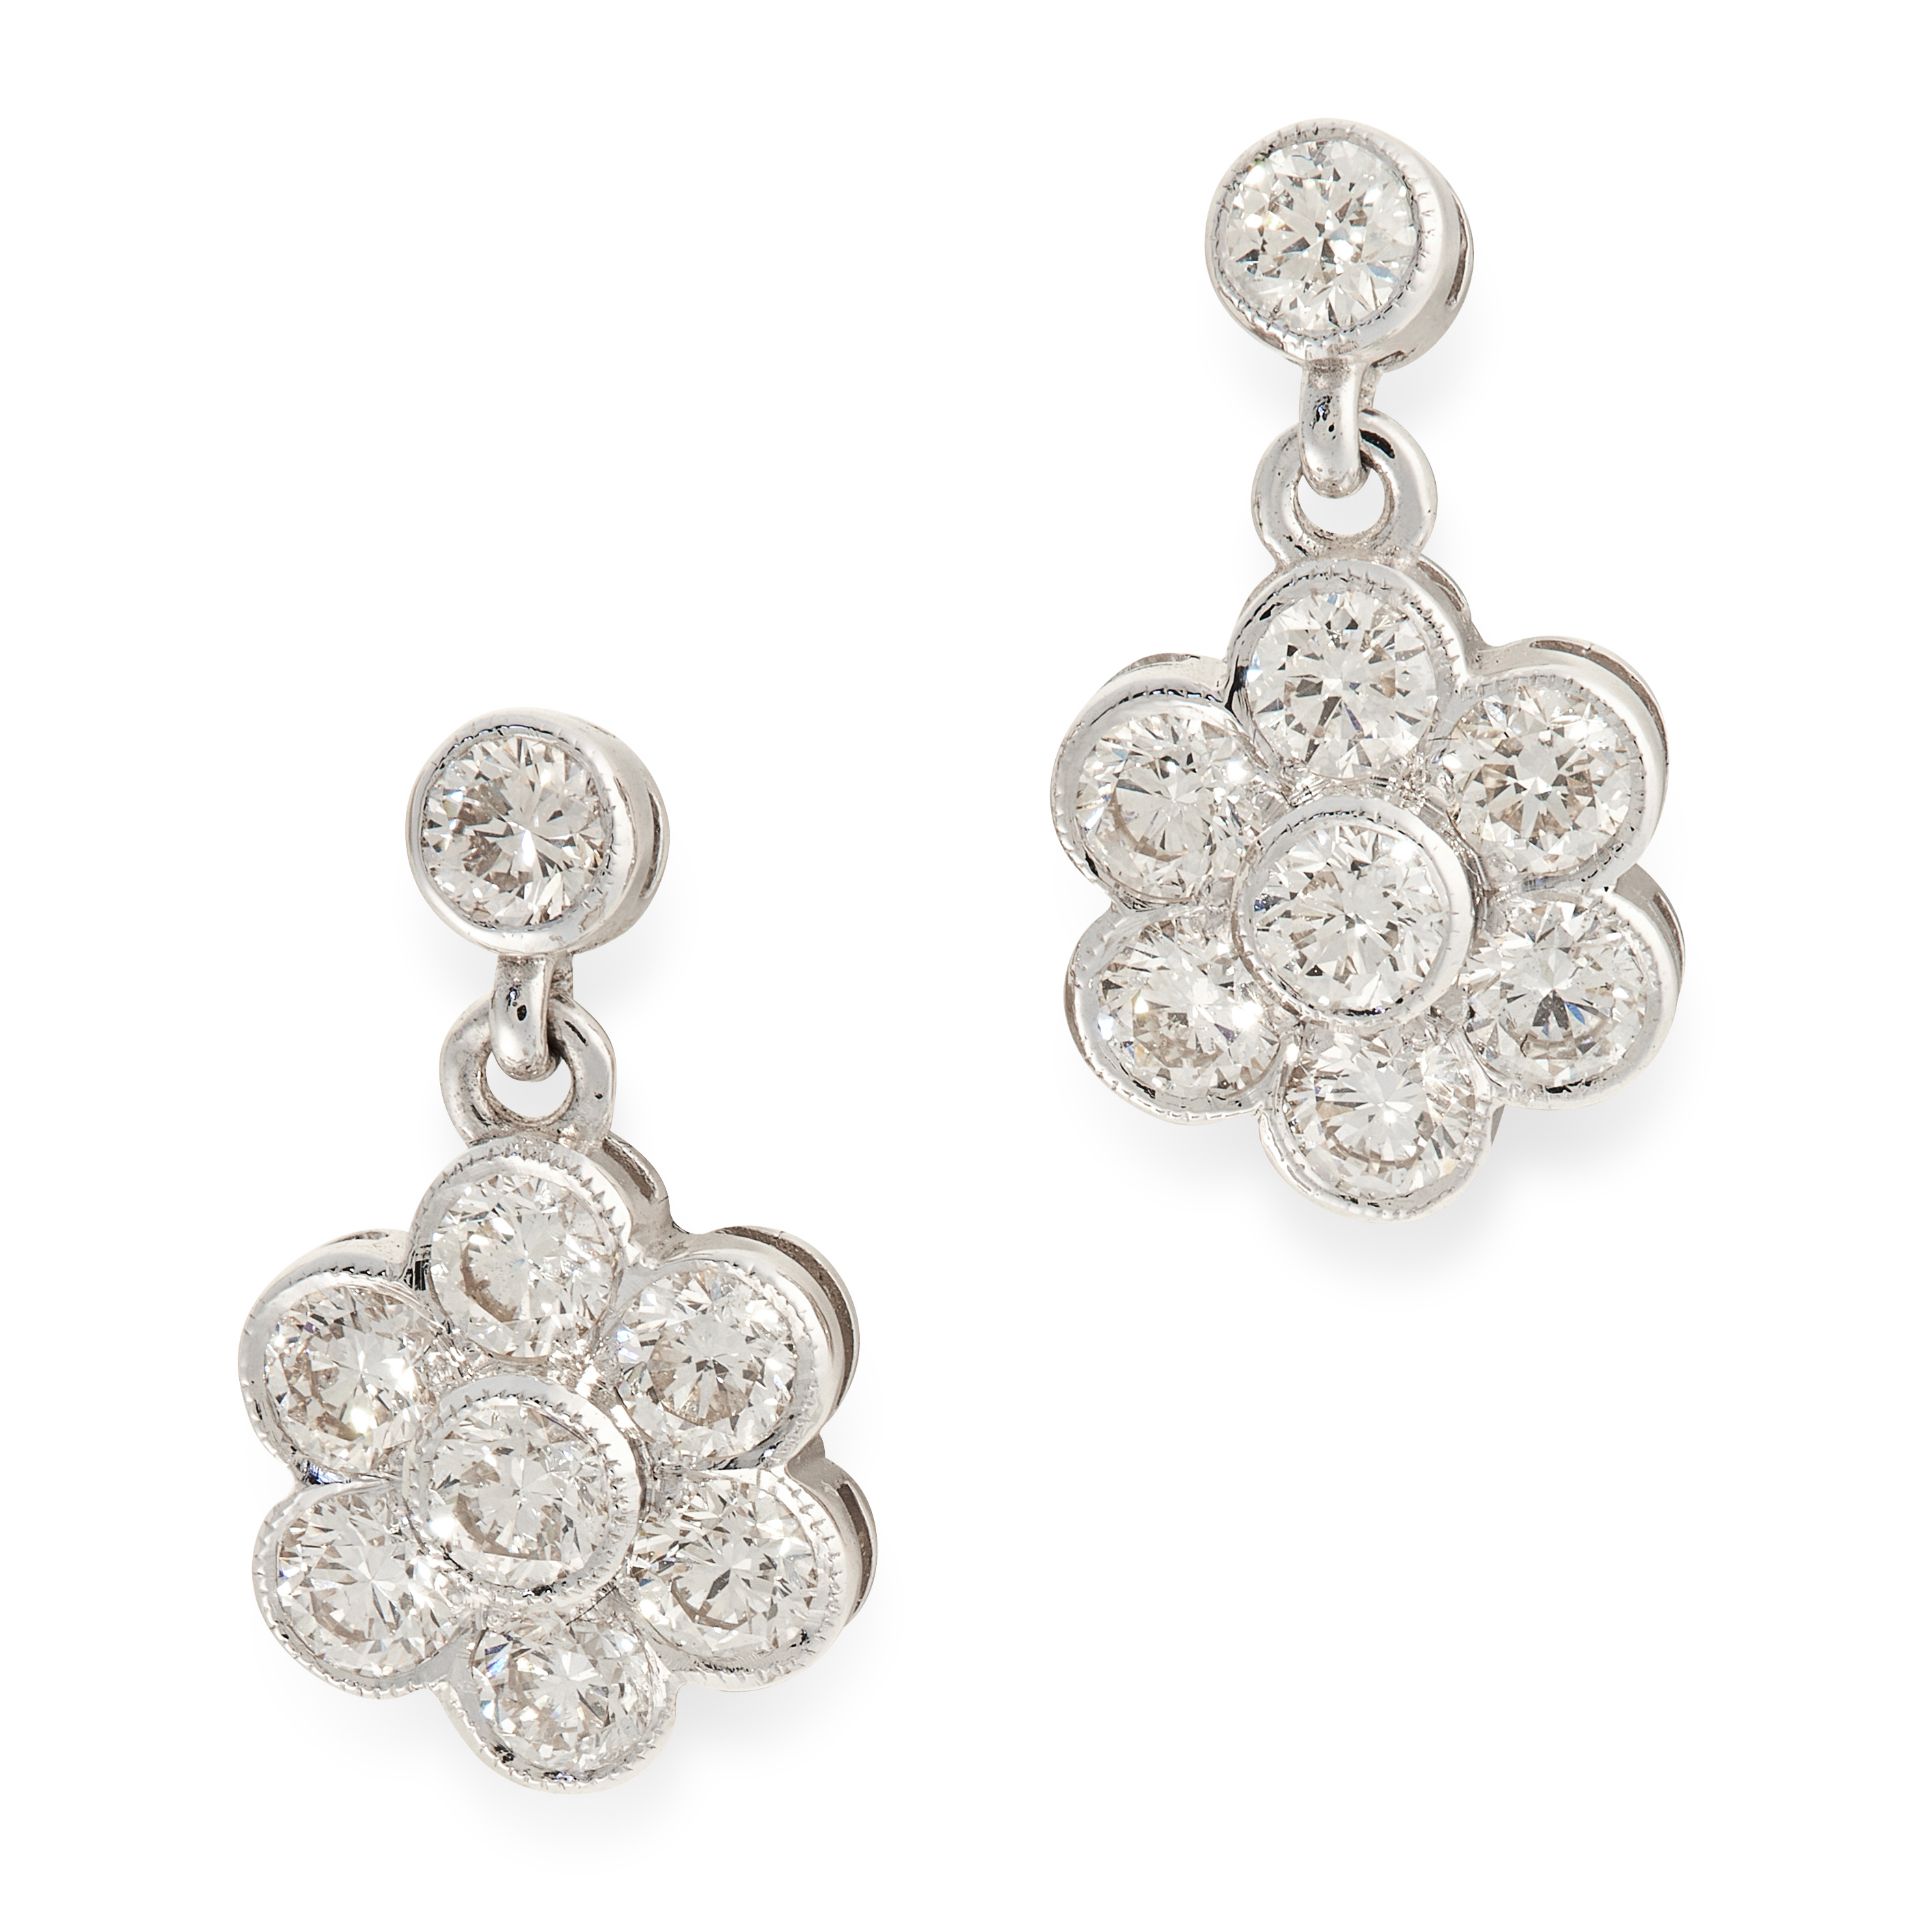 A PAIR OF DIAMOND FLOWER EARRINGS in 18ct white gold, each set with a round cut diamond,